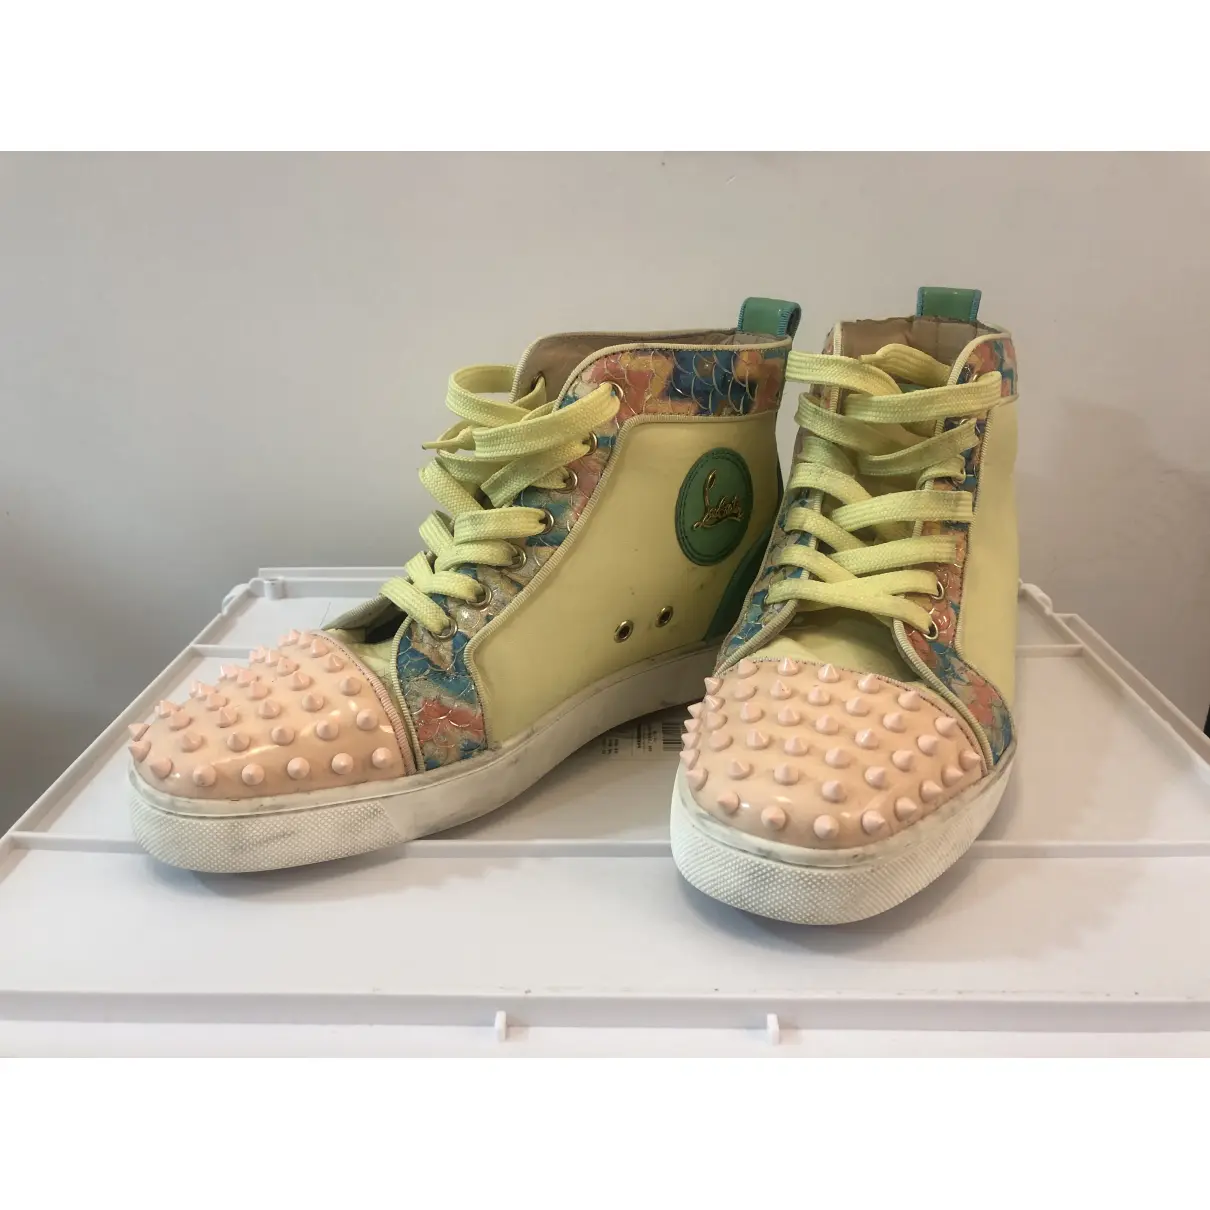 Buy Christian Louboutin Louis leather high trainers online